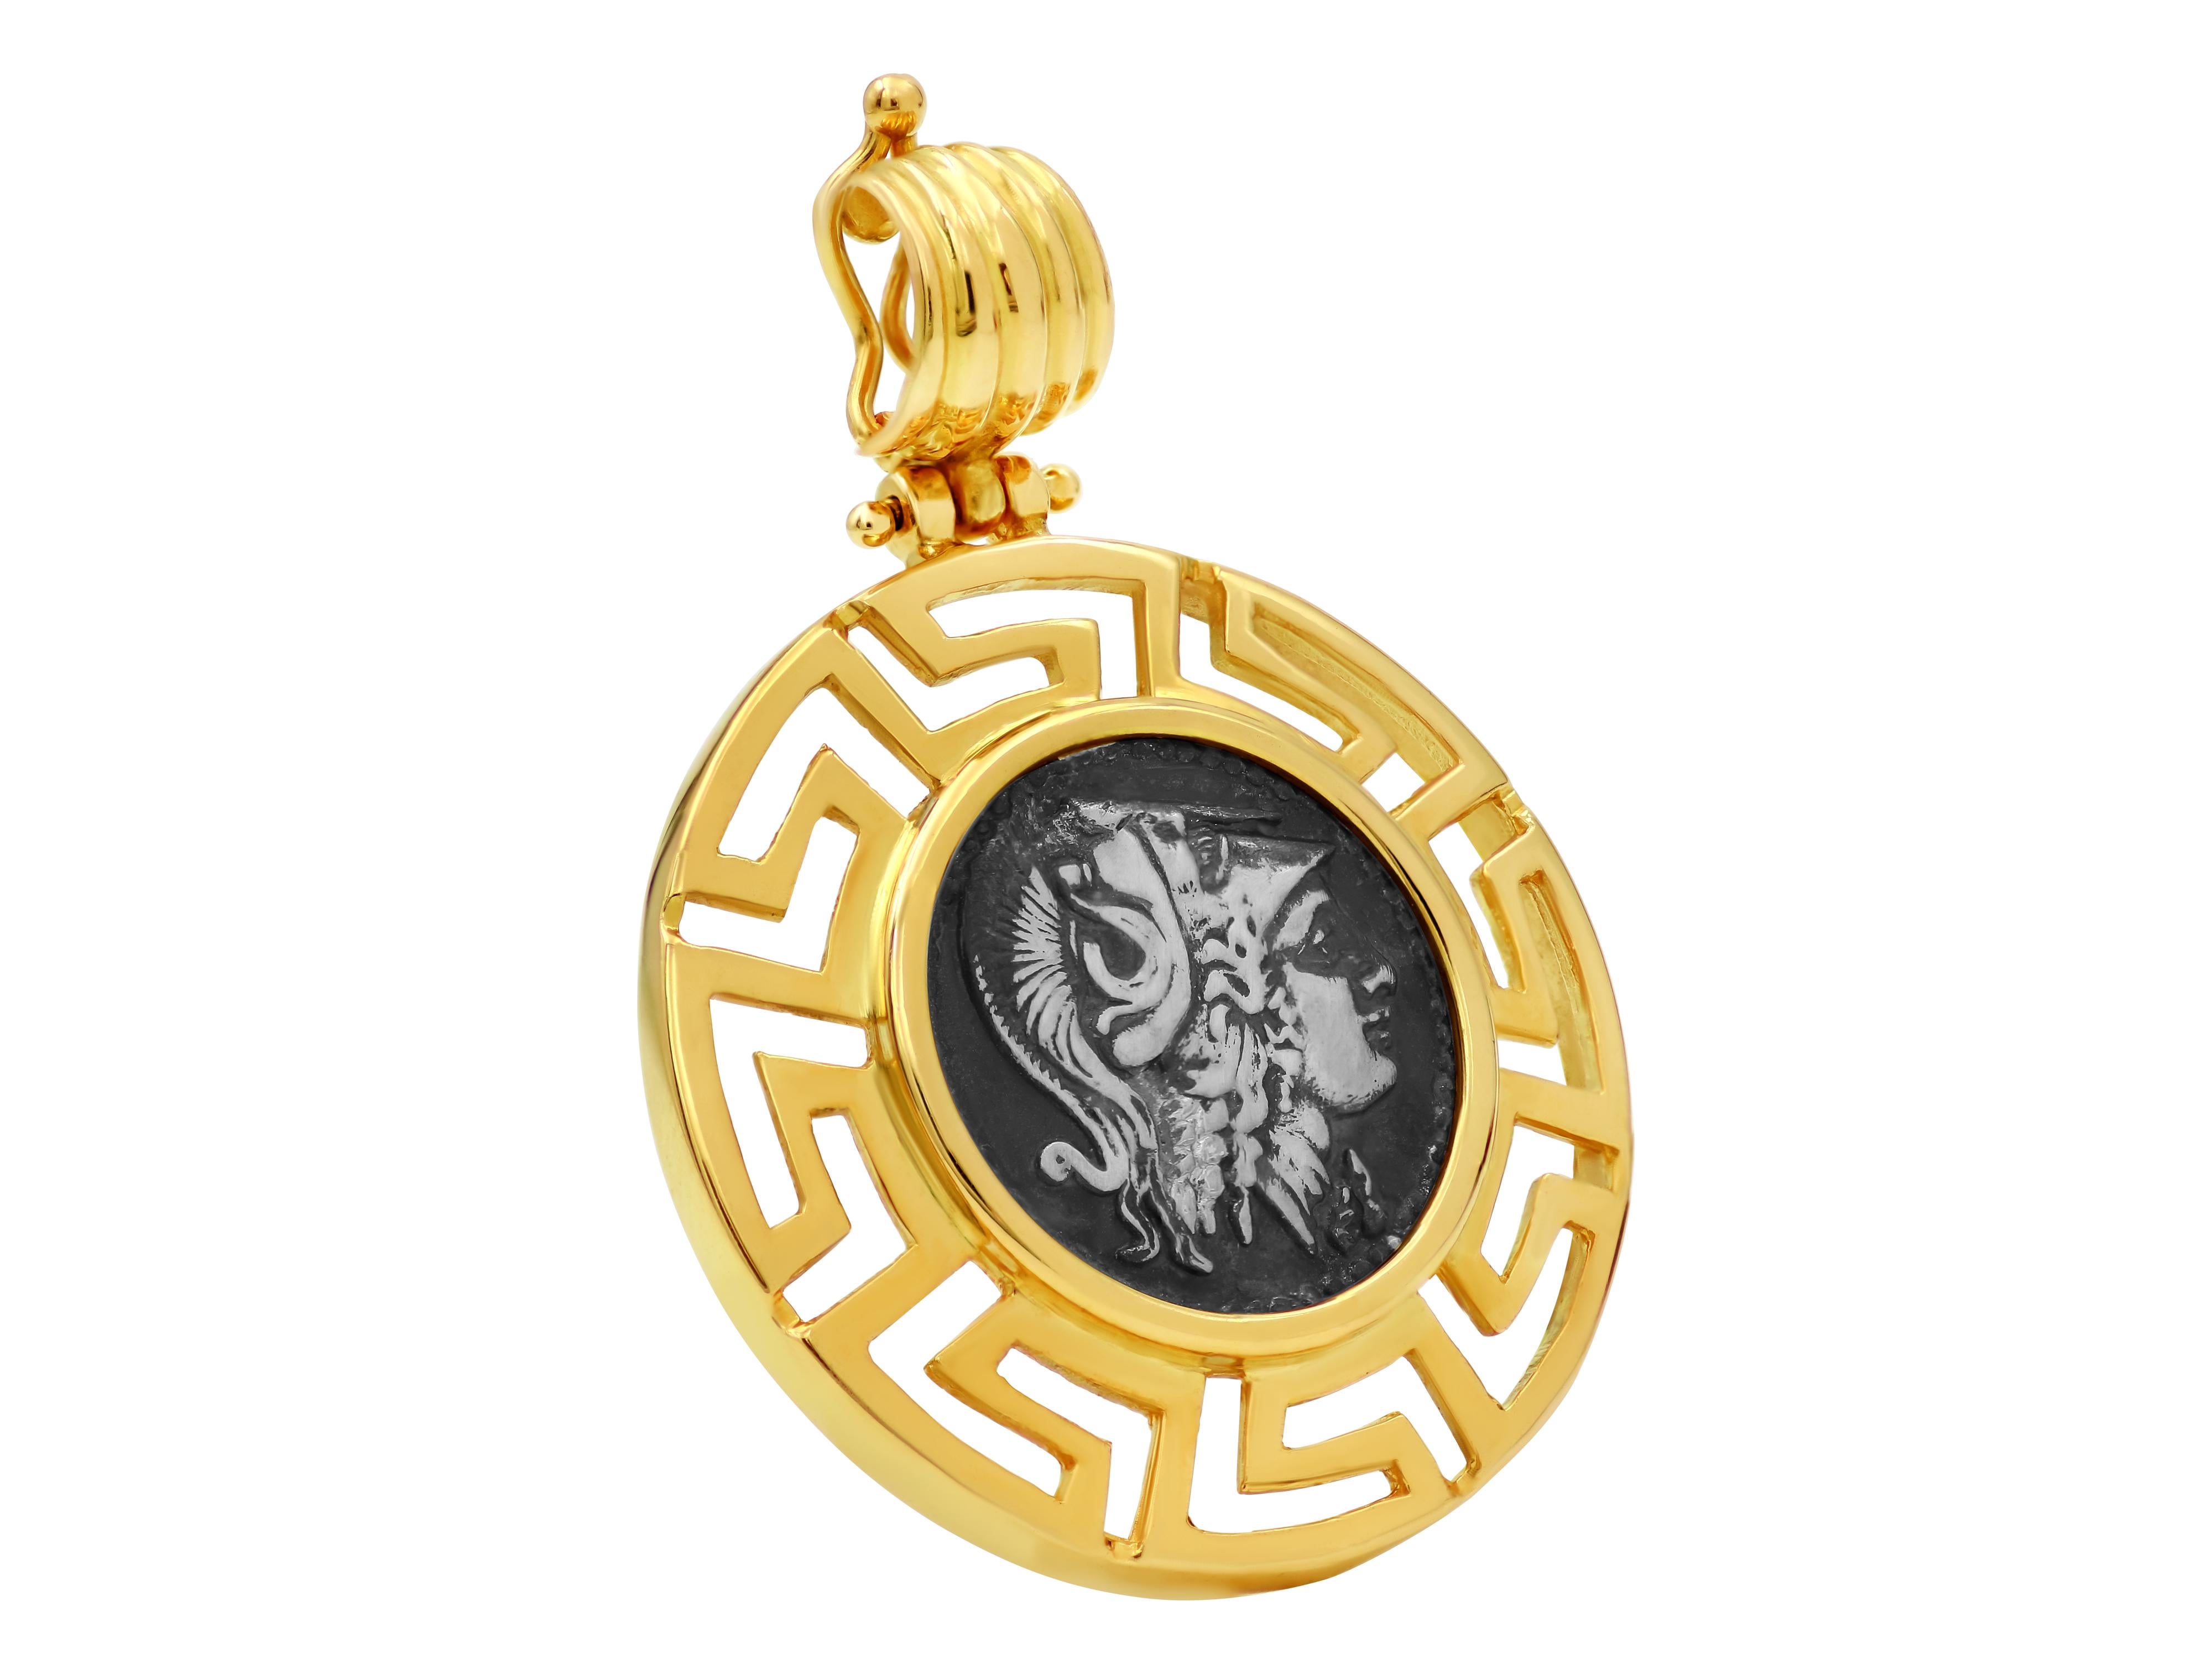 Goddess Athena silver coin that dates somewhere in 510 B.C set in 18k yellow gold frame with Greek Key design.
A statement piece that can be added anywhere due to the opening bezel and can be worn with anything you can imagine from your omega